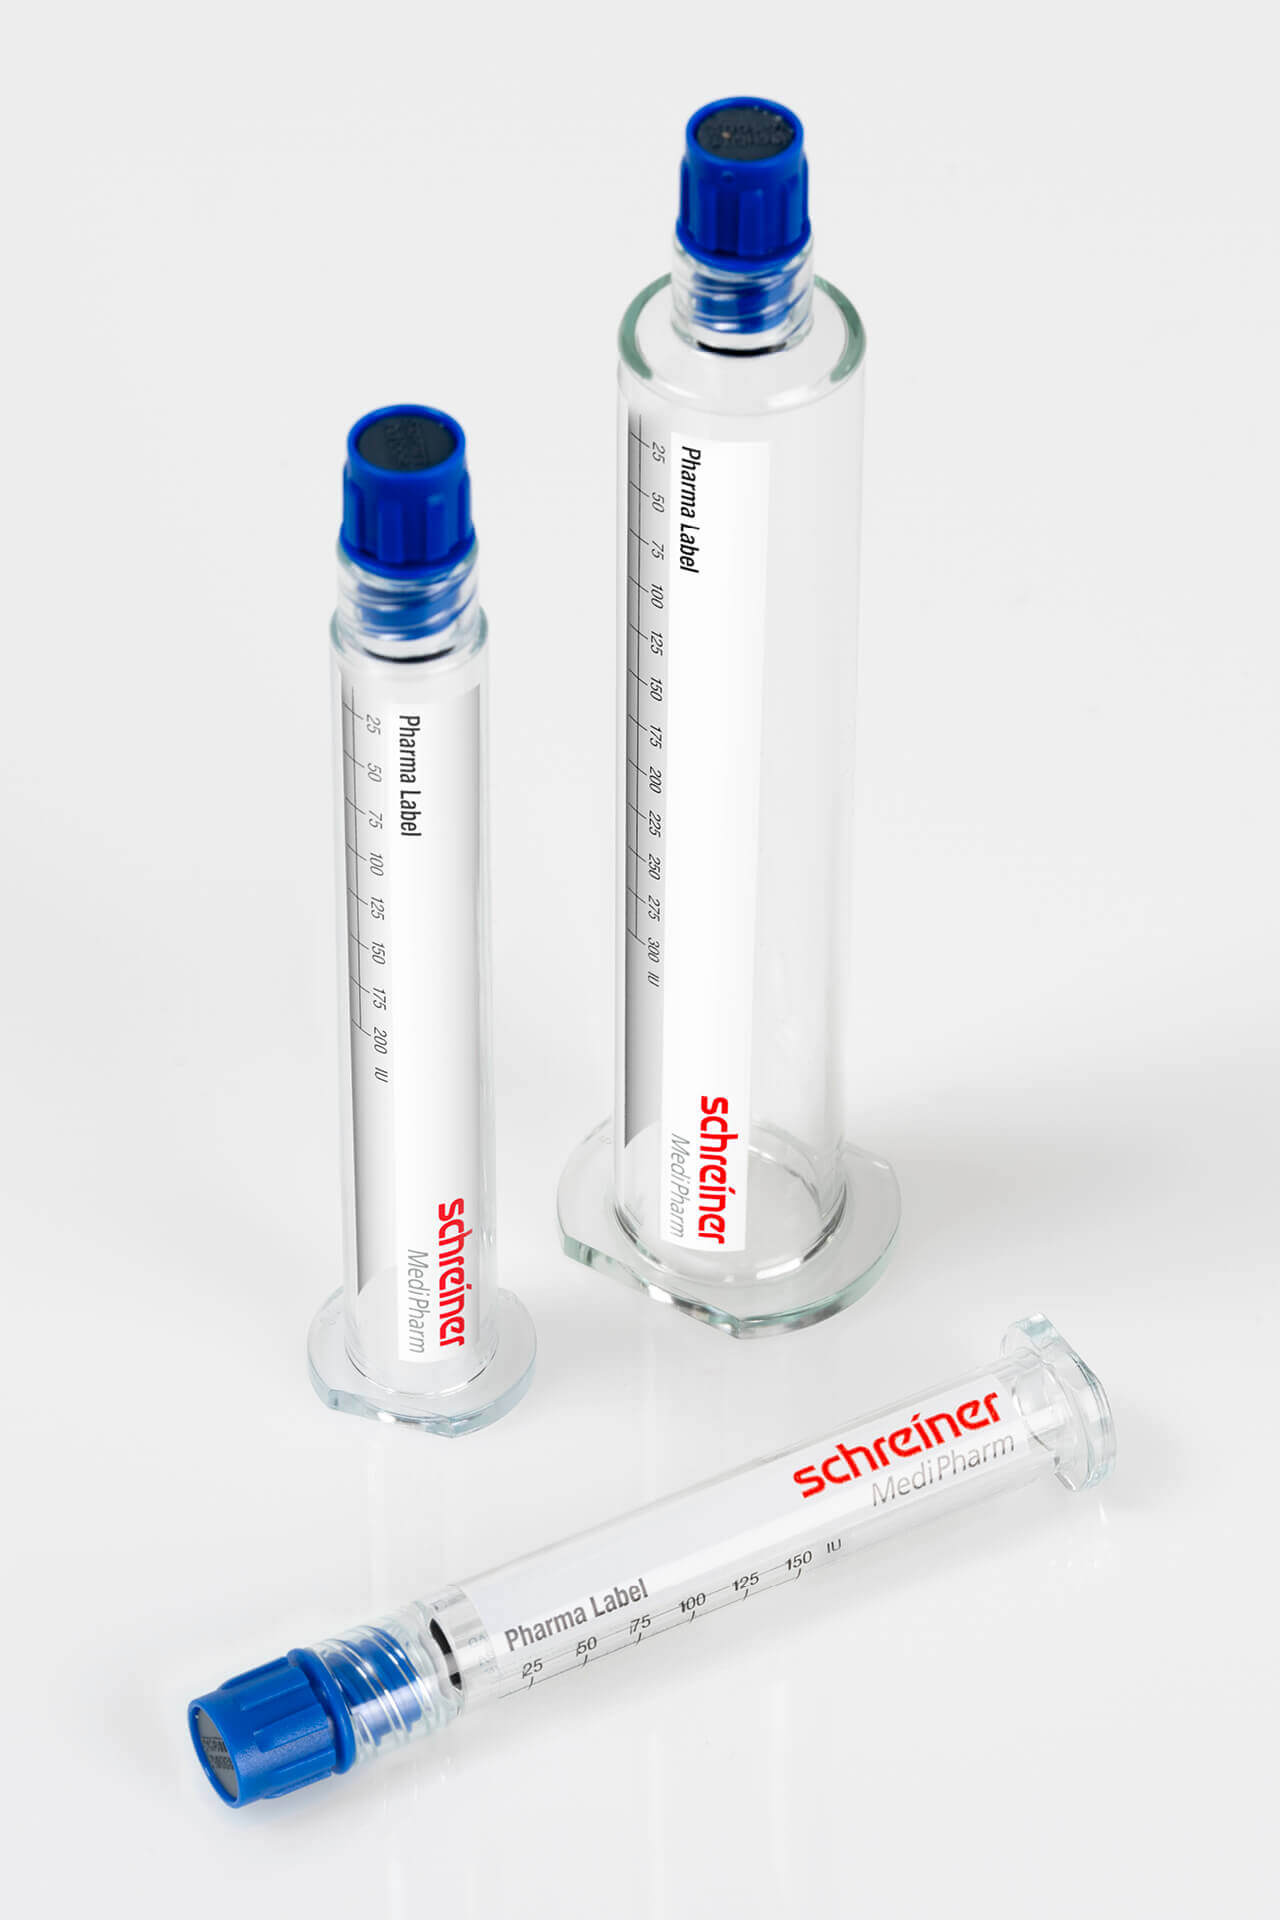 Labels with diverse functions that are made of specialty materials can optimally complement polymer syringes.